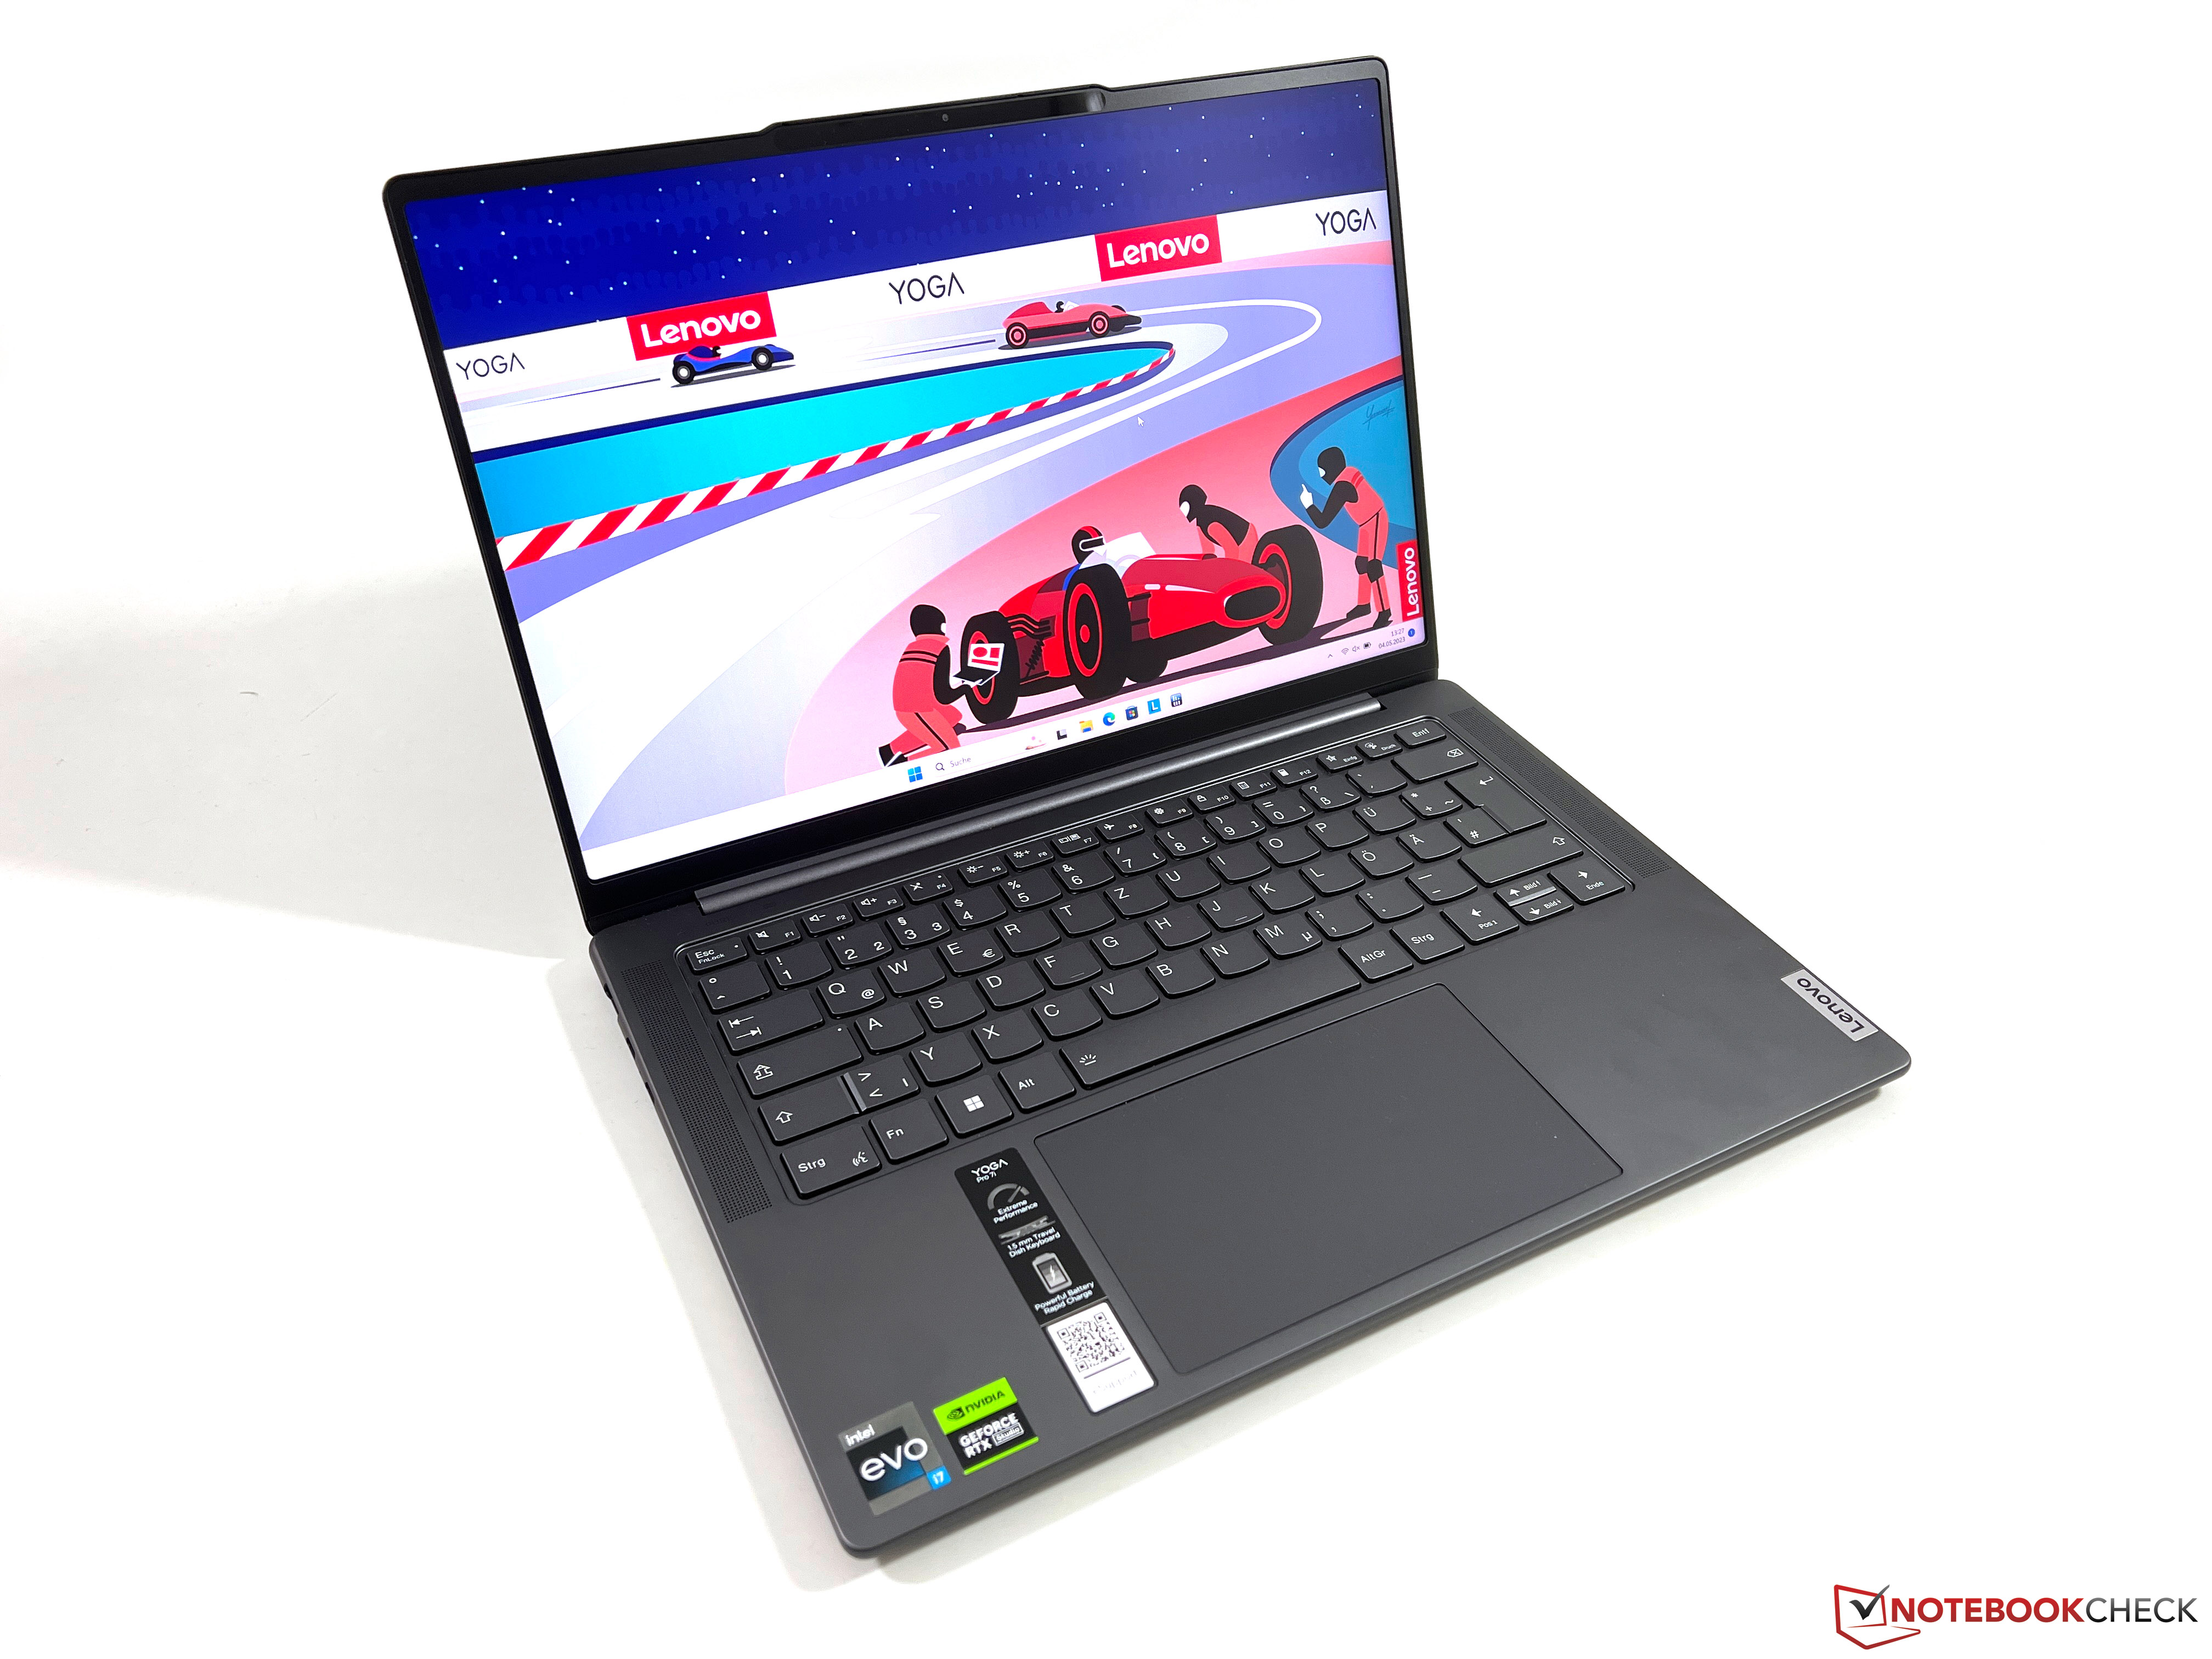 Lenovo Yoga Pro 7 14 becomes a mobile gamer thanks to GeForce RTX 4050 laptop